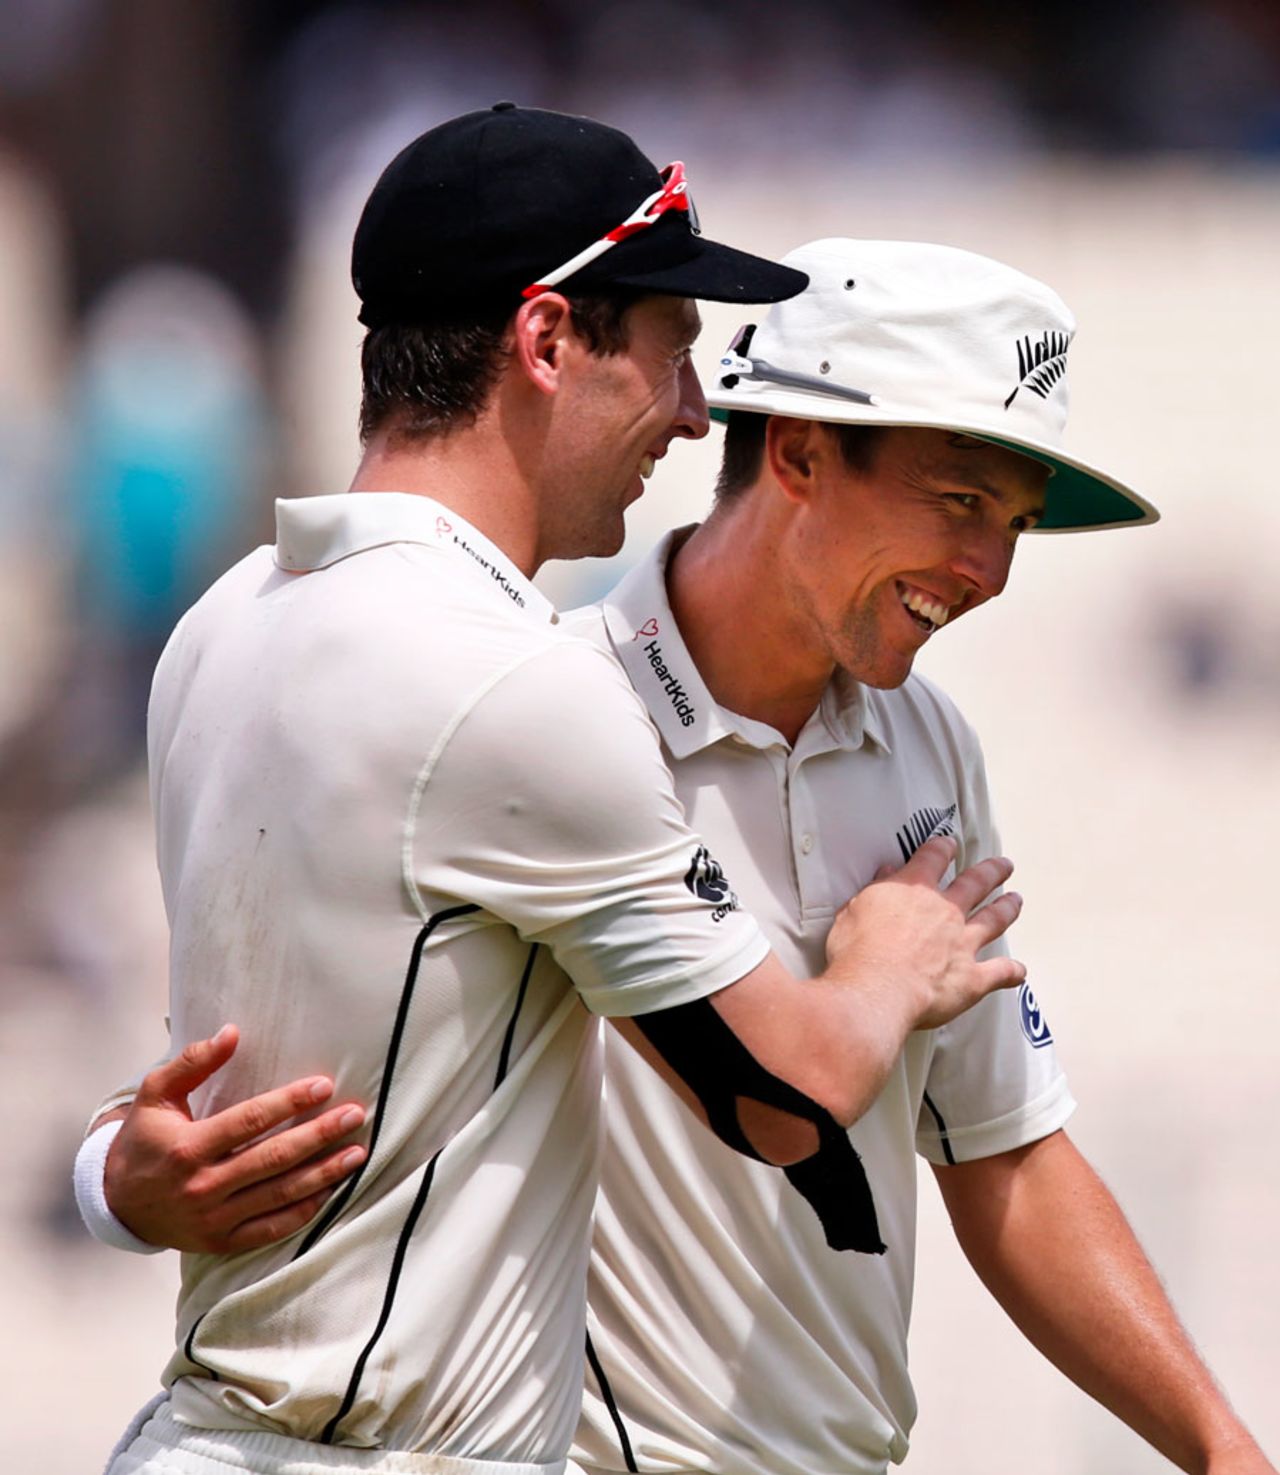 Matt Henry and Trent Boult are all smiles after combining to dismiss Mohammed Shami, India v New Zealand, 2nd Test, Kolkata, 2nd day, October 1, 2016